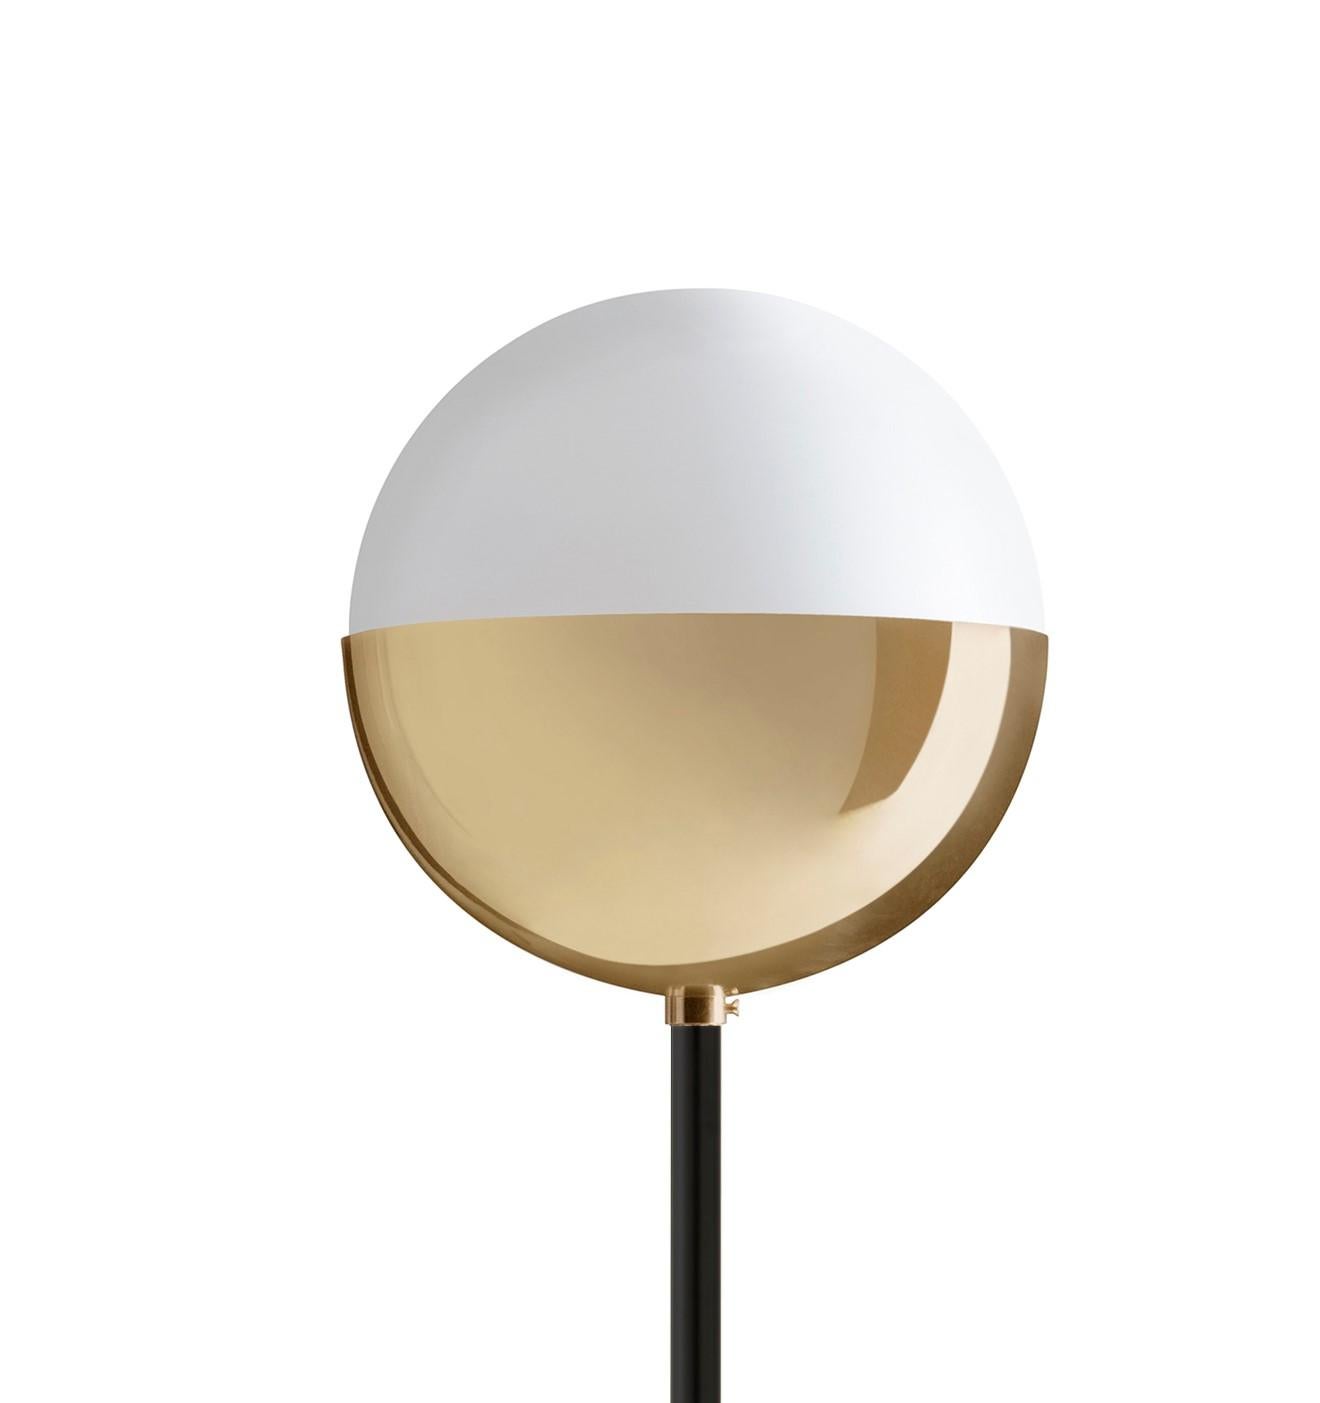 Floor lamp 01 dimmable 150 by Magic Circus Editions
Dimensions: D 25 x H 150 cm
Materials: Carrara marble base, smooth brass tube, glossy mouth blown glass
Non-Dimmable version available.


Rethinking, reimagining, redesigning familiar objects